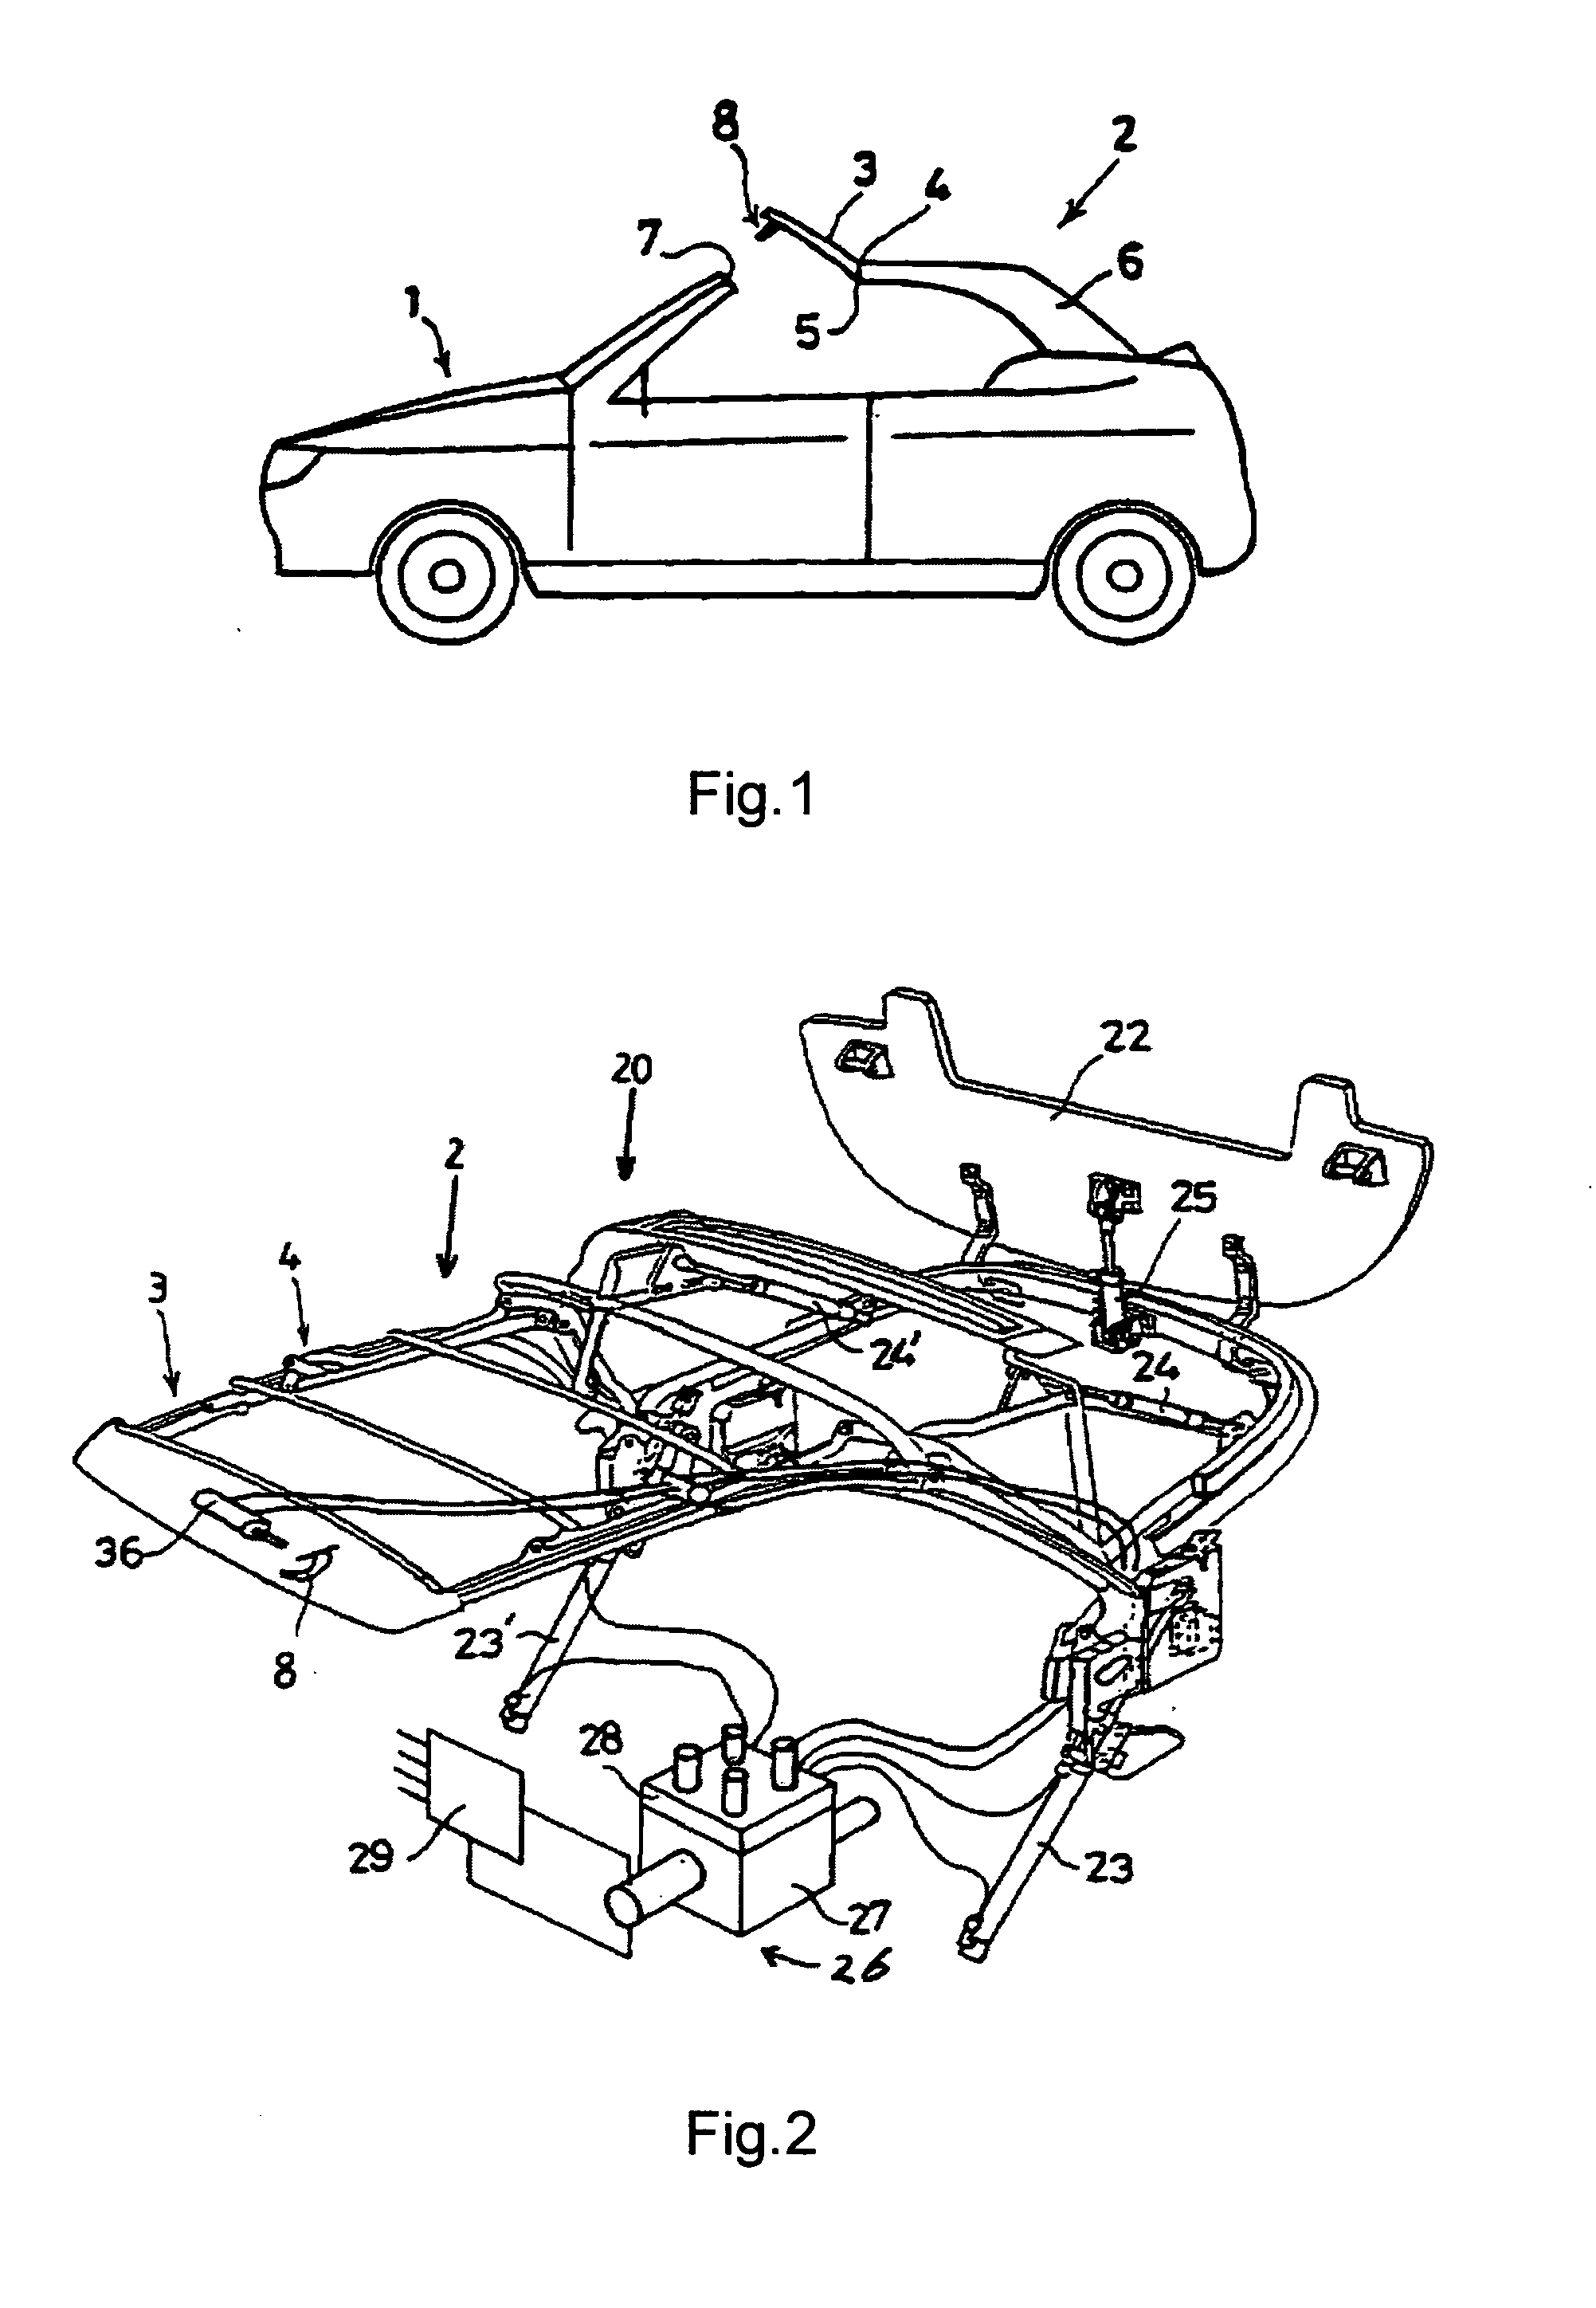 Hydraulic system with a pressure ripple reduction device